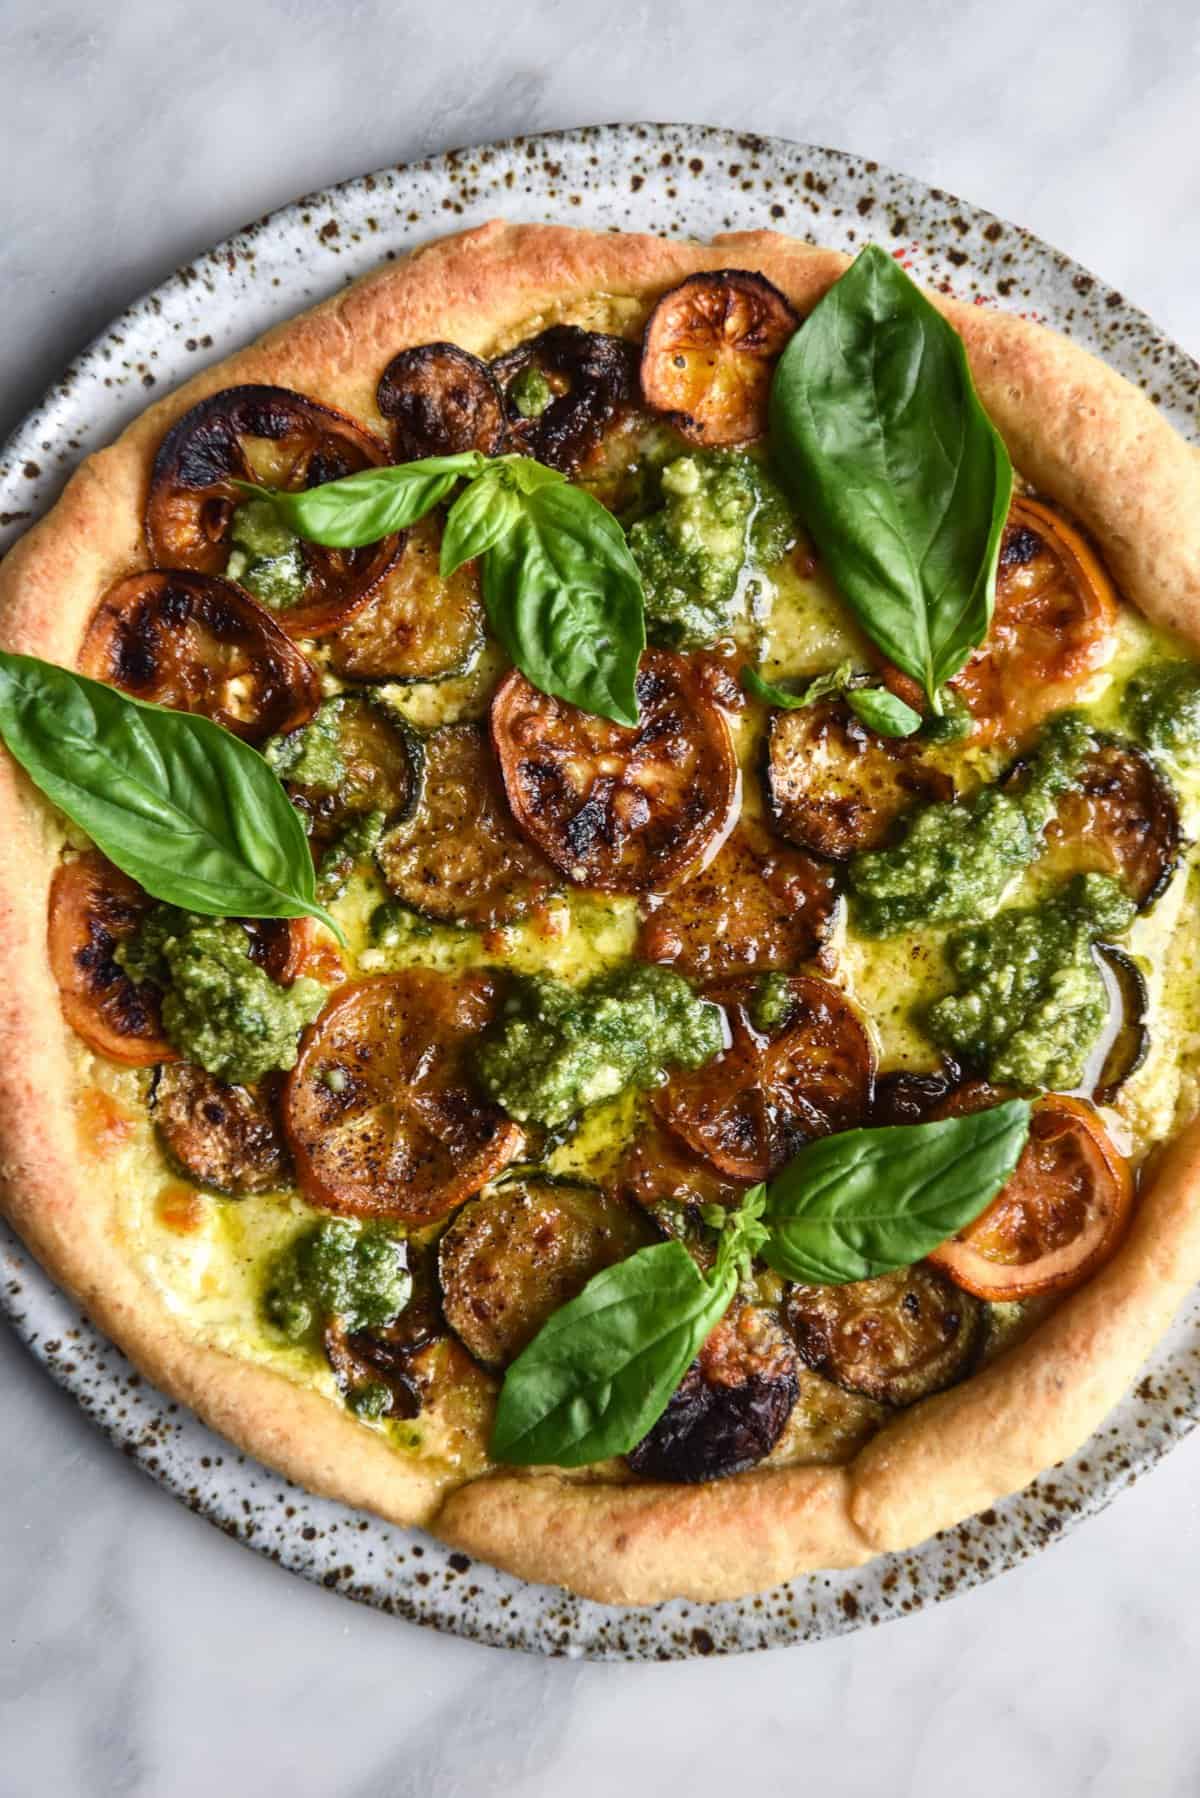 An aerial view of a FODMAP friendly, gluten free sourdough pizza topped with caramelised lemons, zucchini coins, FODMAP friendly pesto, melted cheese and extra basil. The pizza sits on a speckled white plate against a white marble backdrop